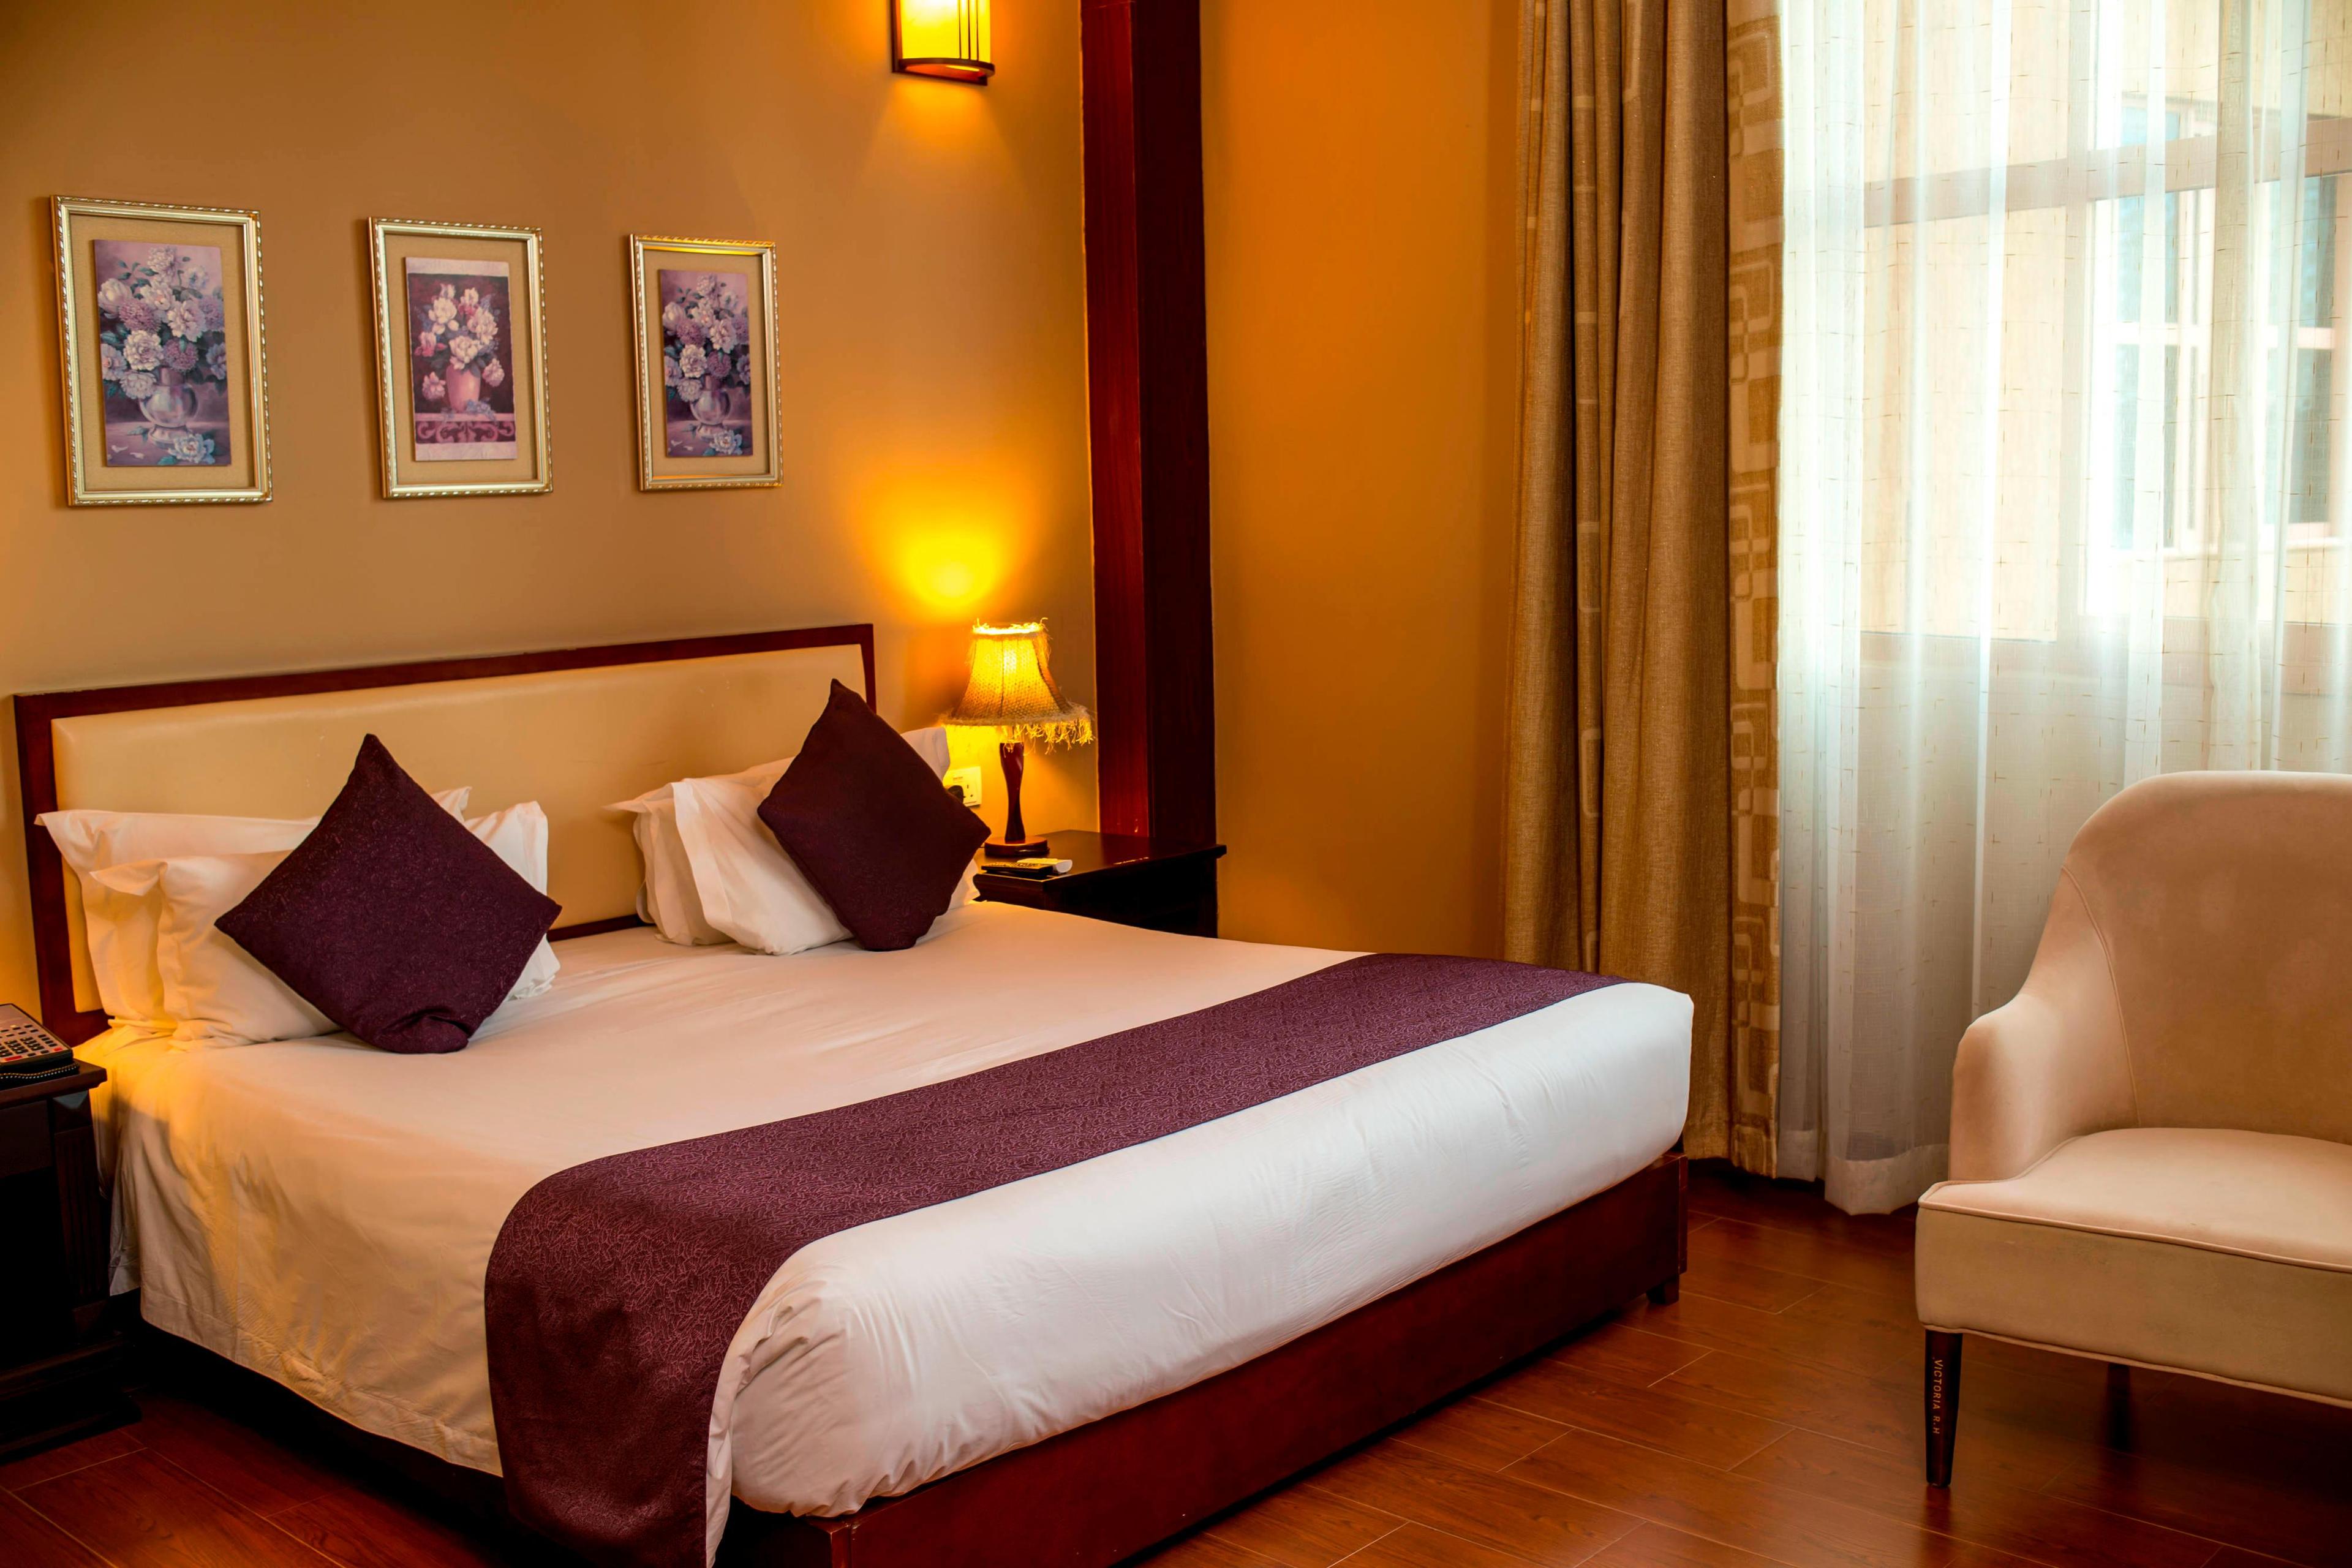 The Double/twin standard guest room is the ideal accommodation for business or leisure guests alike, with all the necessary amenities to ensure a comfortable stay.